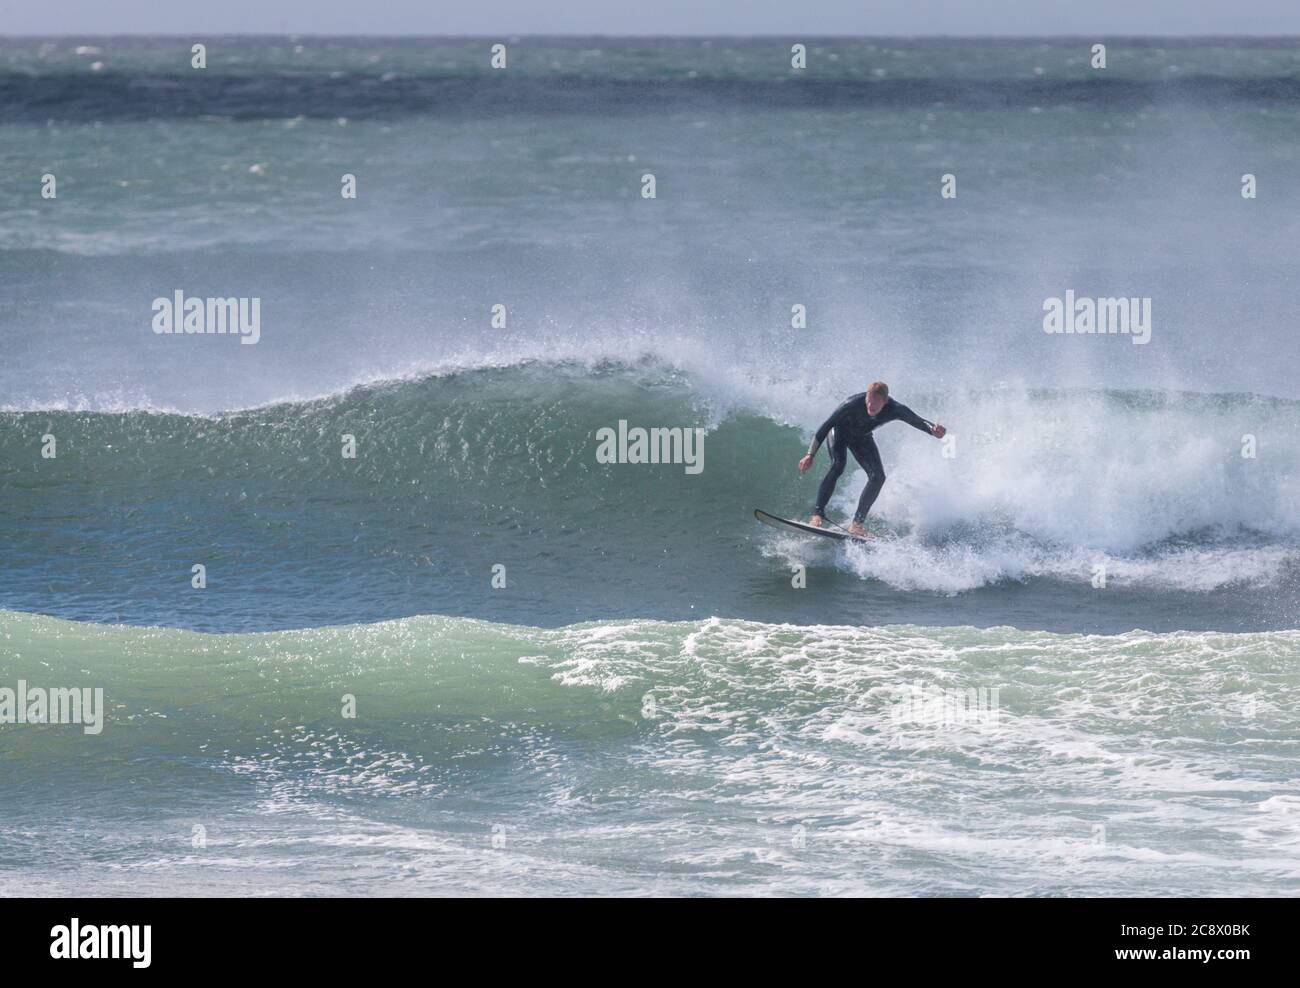 Garrettstown, Cork, Ireland. 27th July, 2020.A surfer rides the wave in turbulent storm like conditions at Garrettstown, Co. Cork, Ireland. - Credit; David Creedon / Alamy Live News Stock Photo